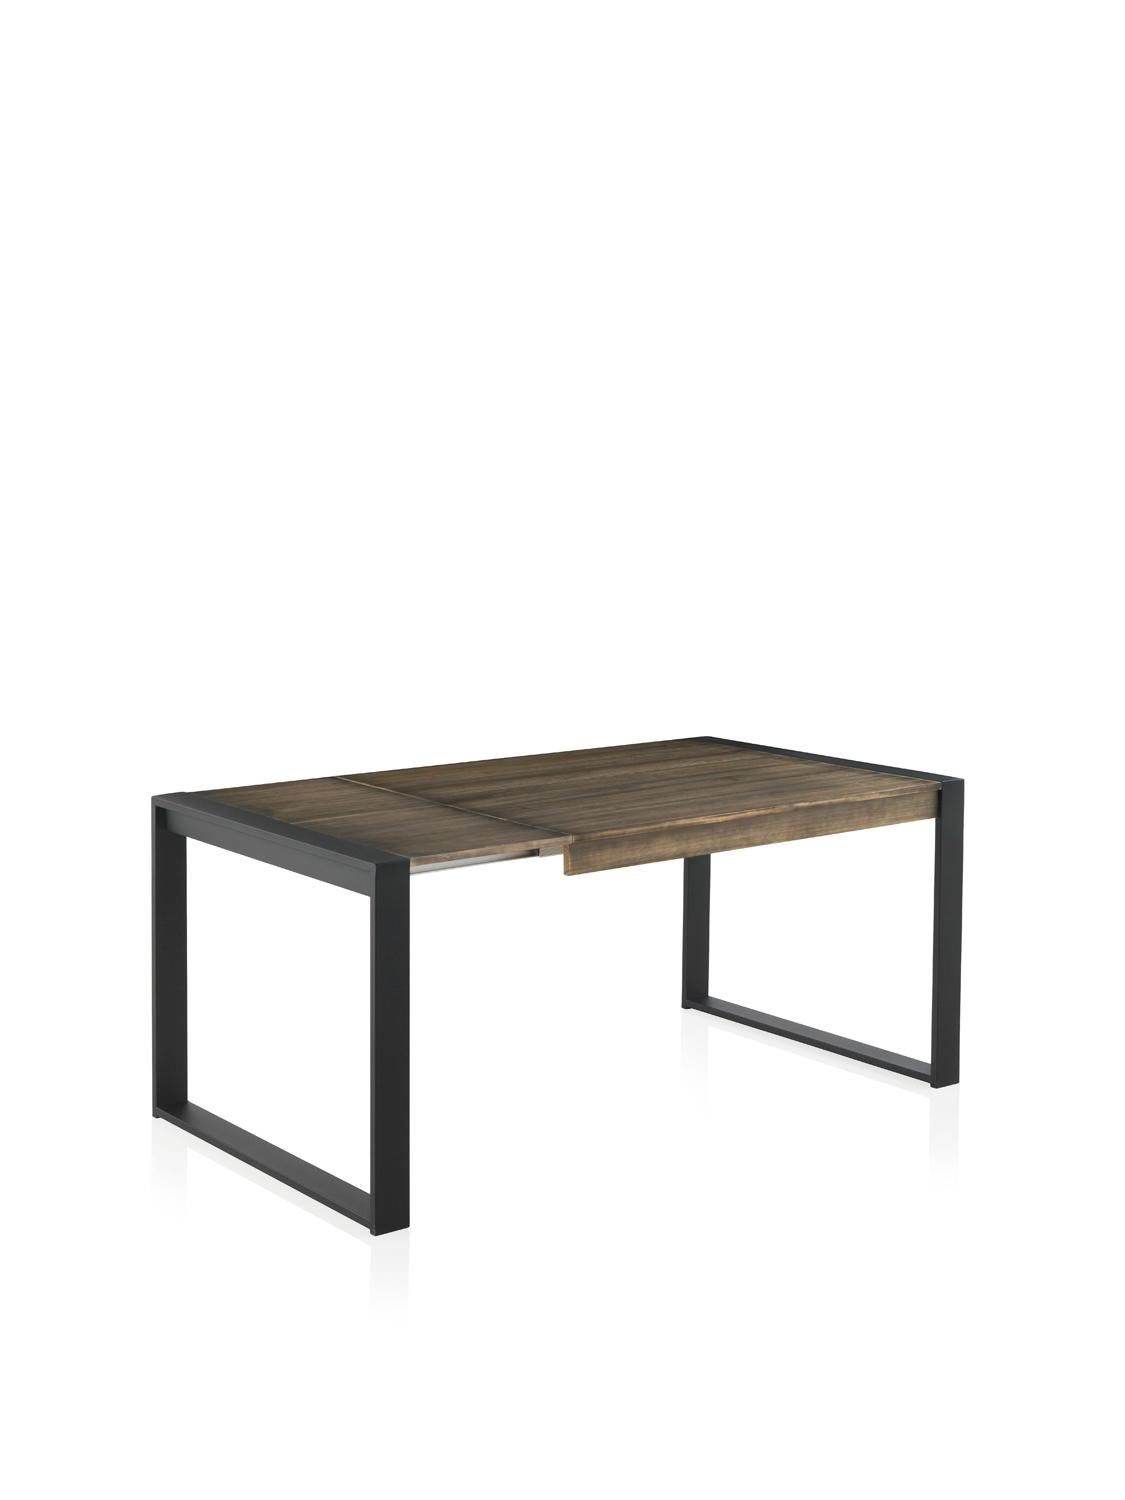 New extendable dining table for indoor and outdoor with wood top and iron structure.

You can choose the color, the color structure and the measure.

Table measurements:
49.60 in x 31.50 in ( with two leaves includes, each leave it´s 15.75in )